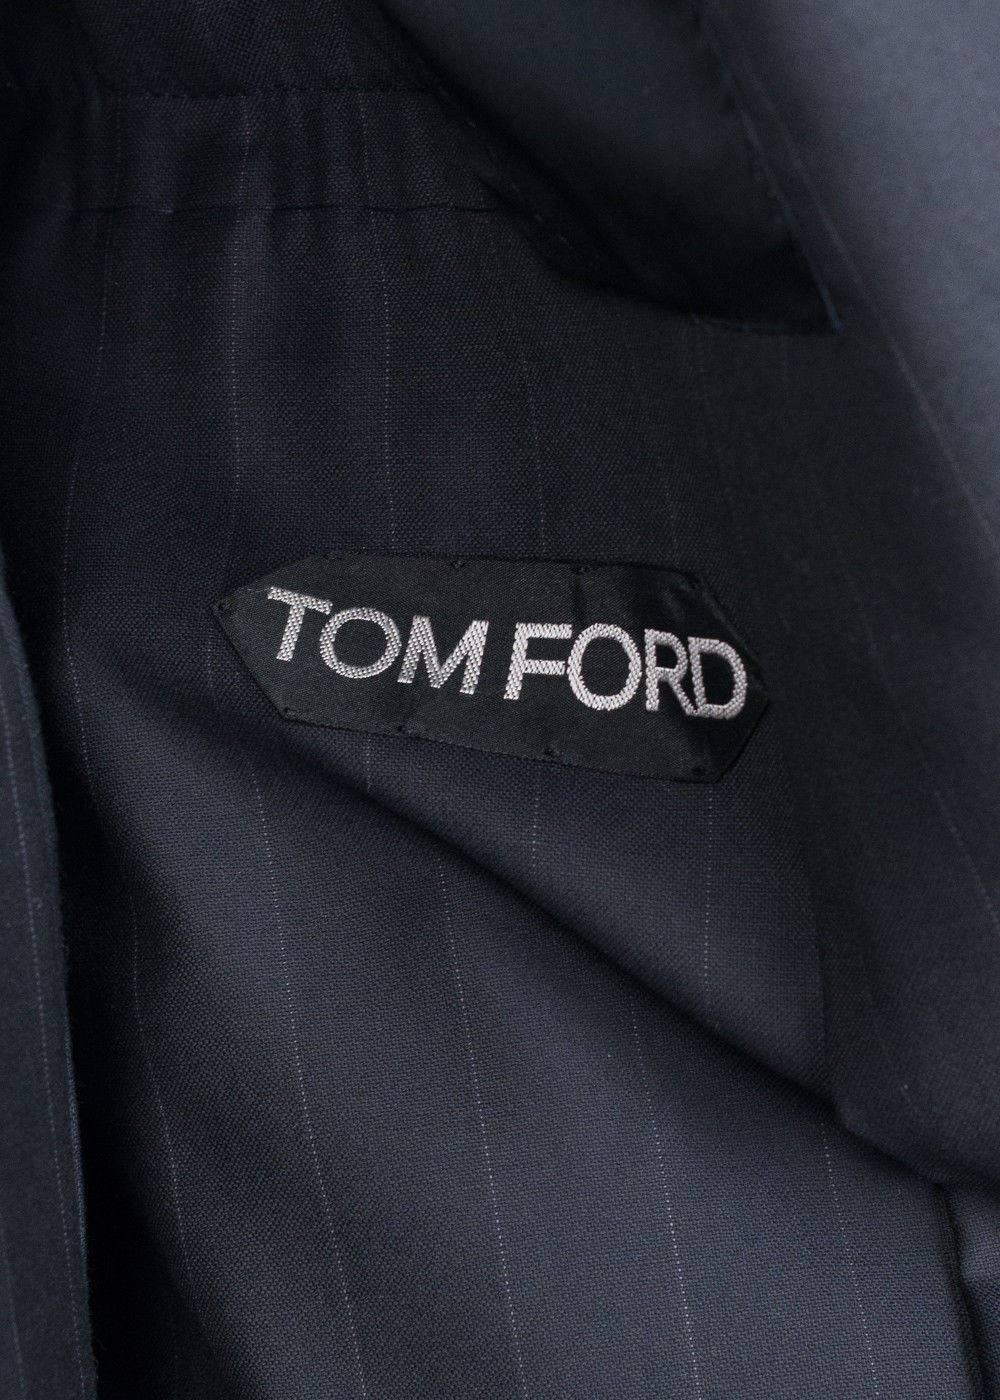 tom ford navy suit